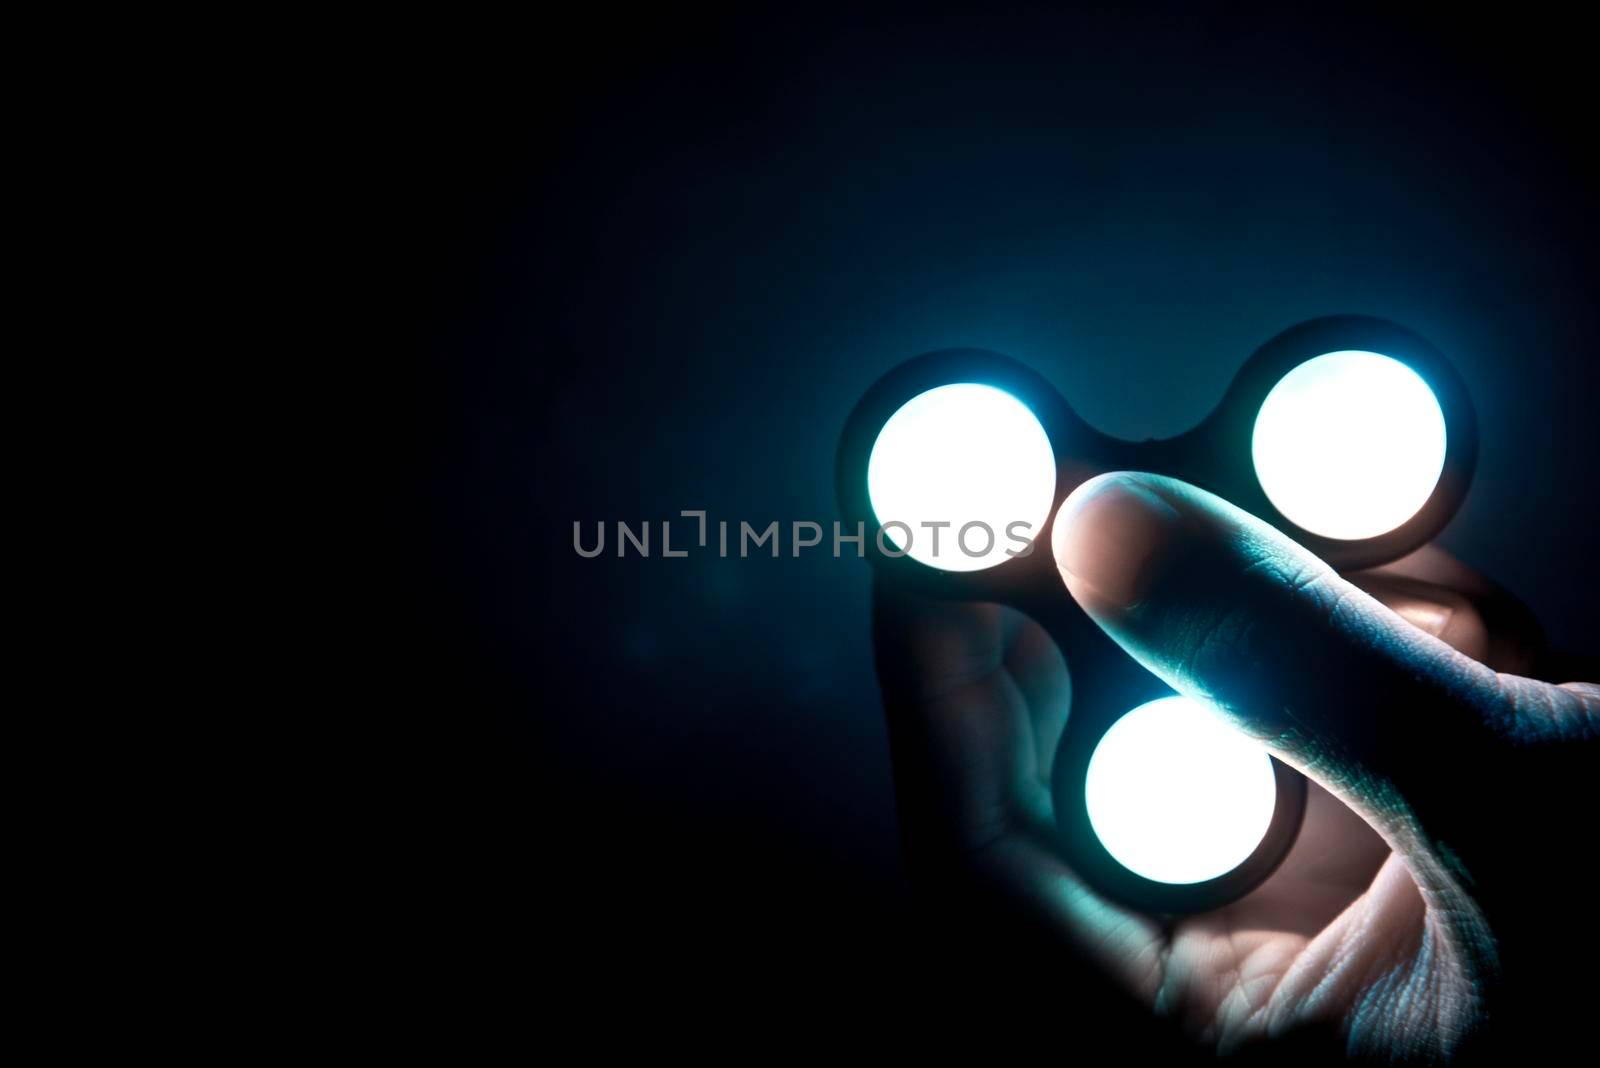 Fidget spinner toy with neon light consist of ball-bearing made from metal or plastic helping people who have trouble with focusing by relieving nervous energy or psychological stress. selective focus by MiniStocker